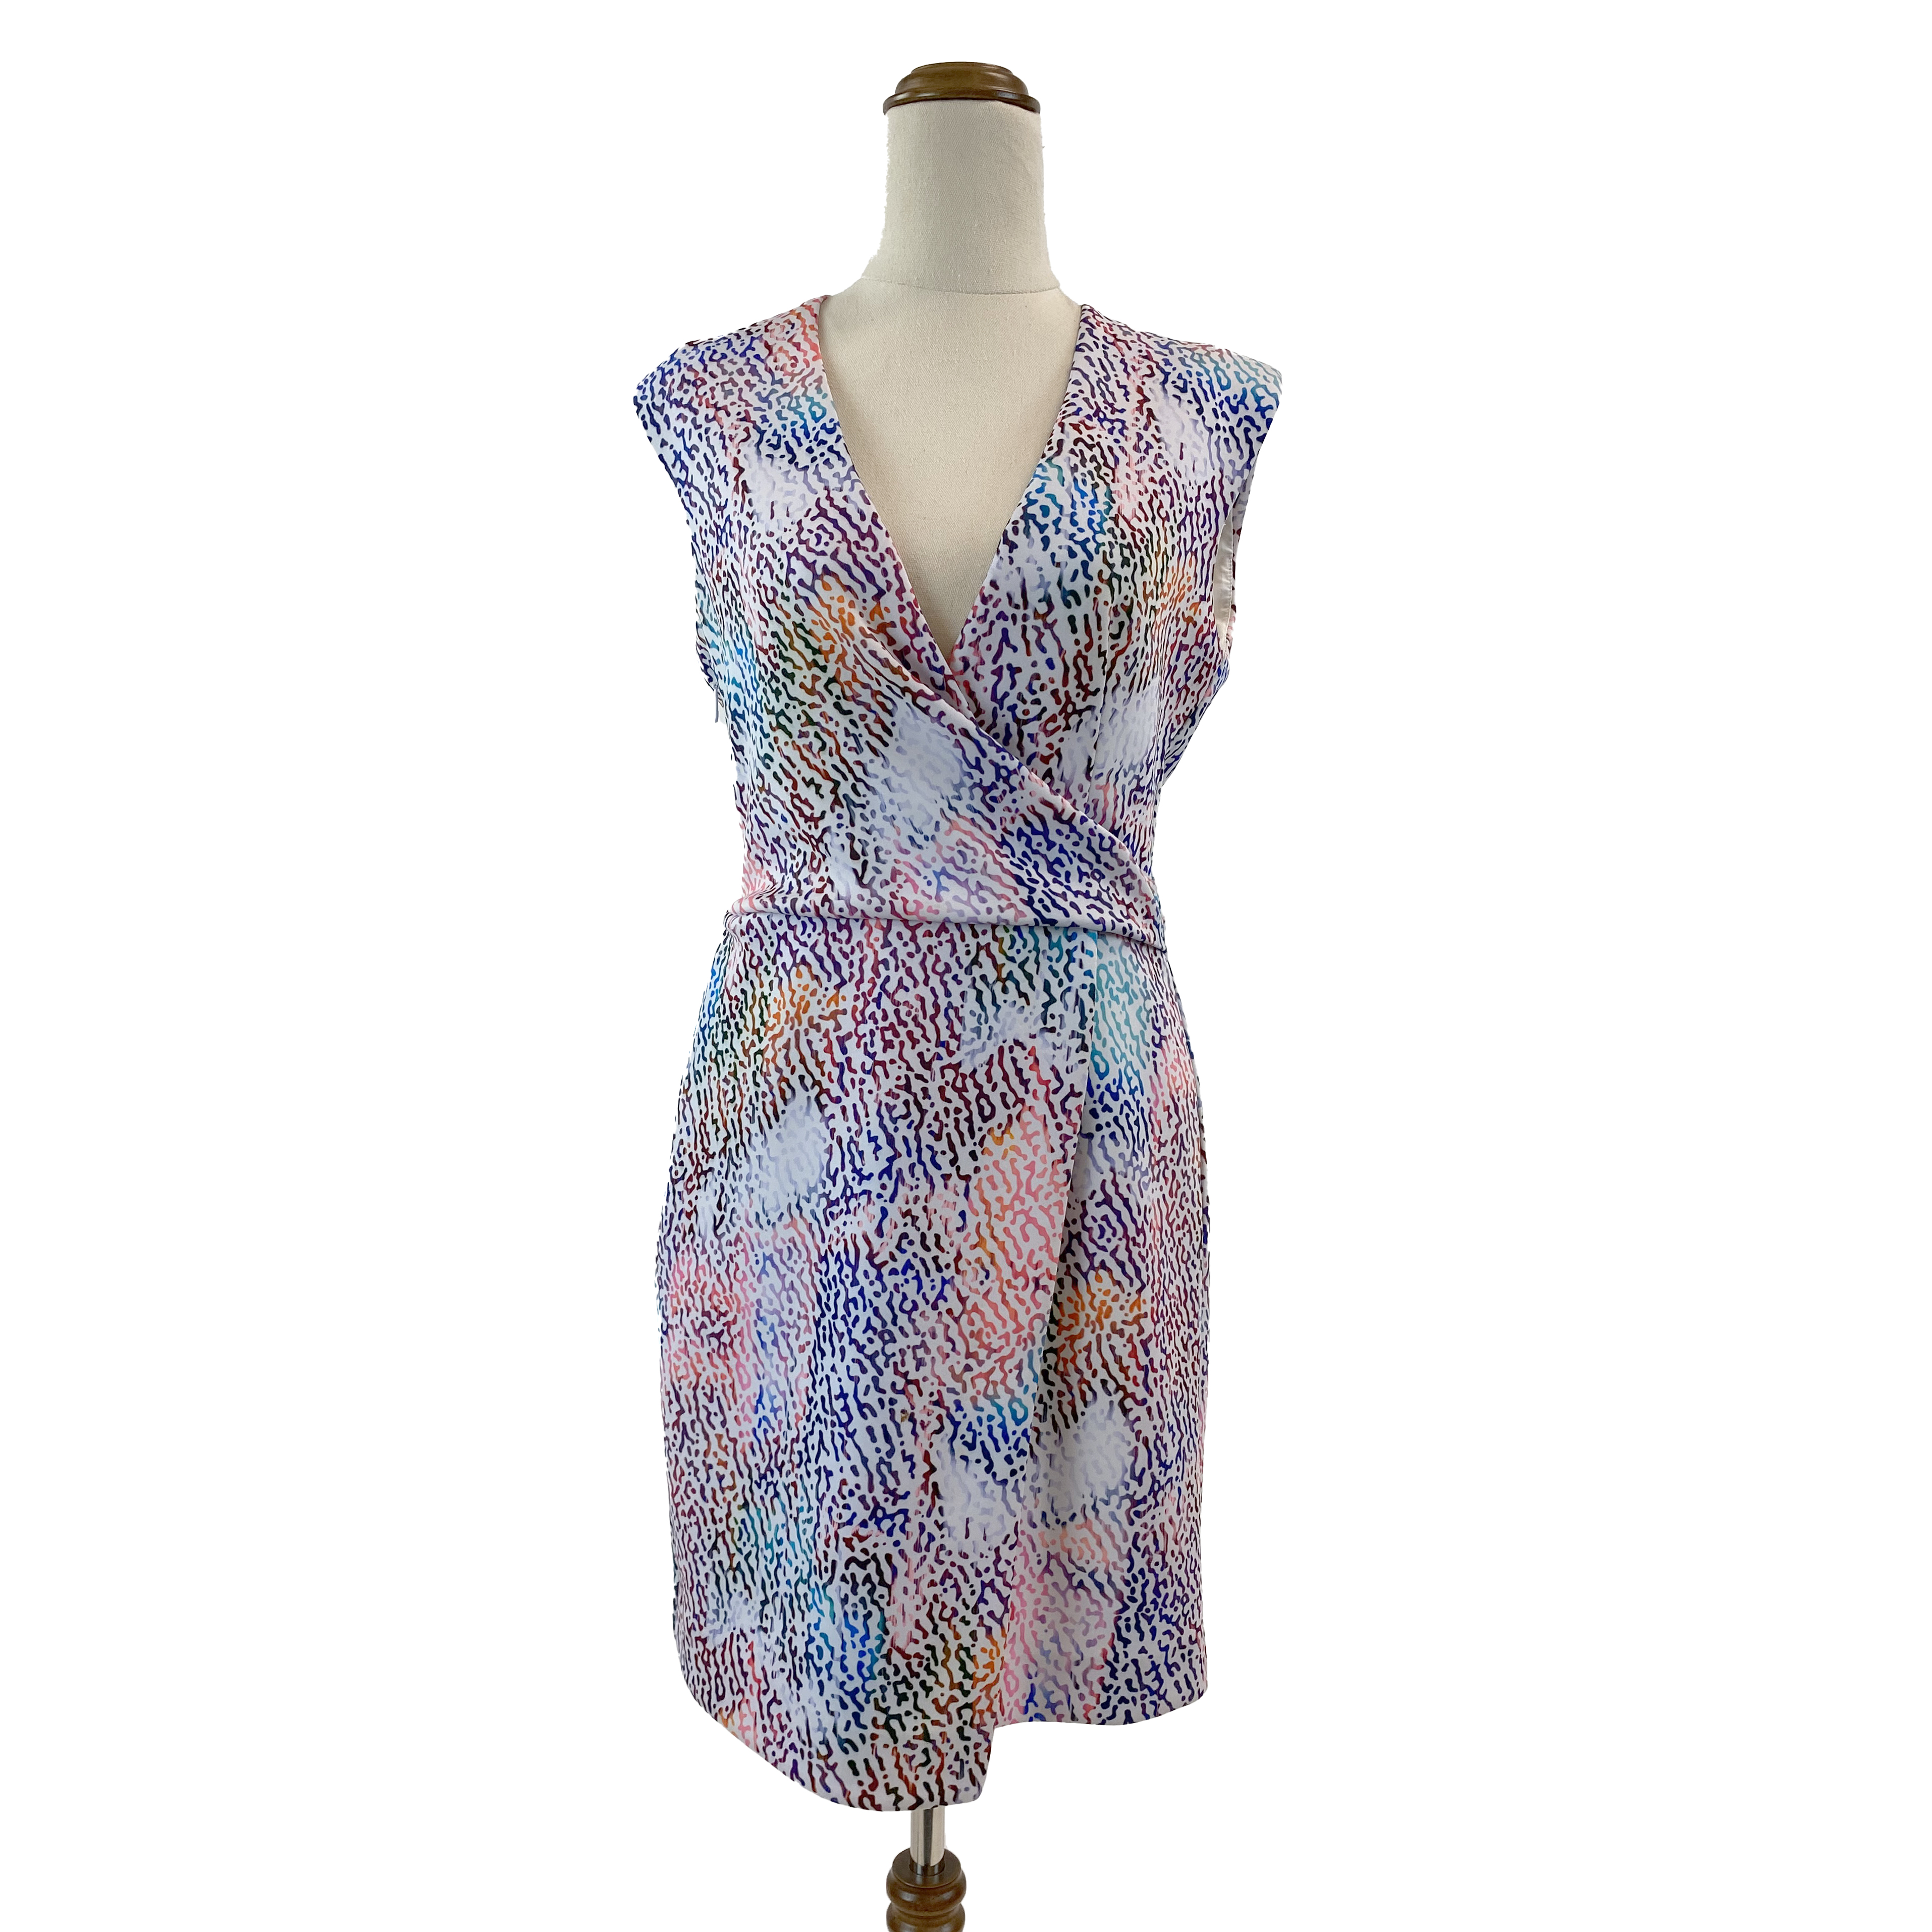 LIFEwithBIRD Colourful Cross-over Bust Dress